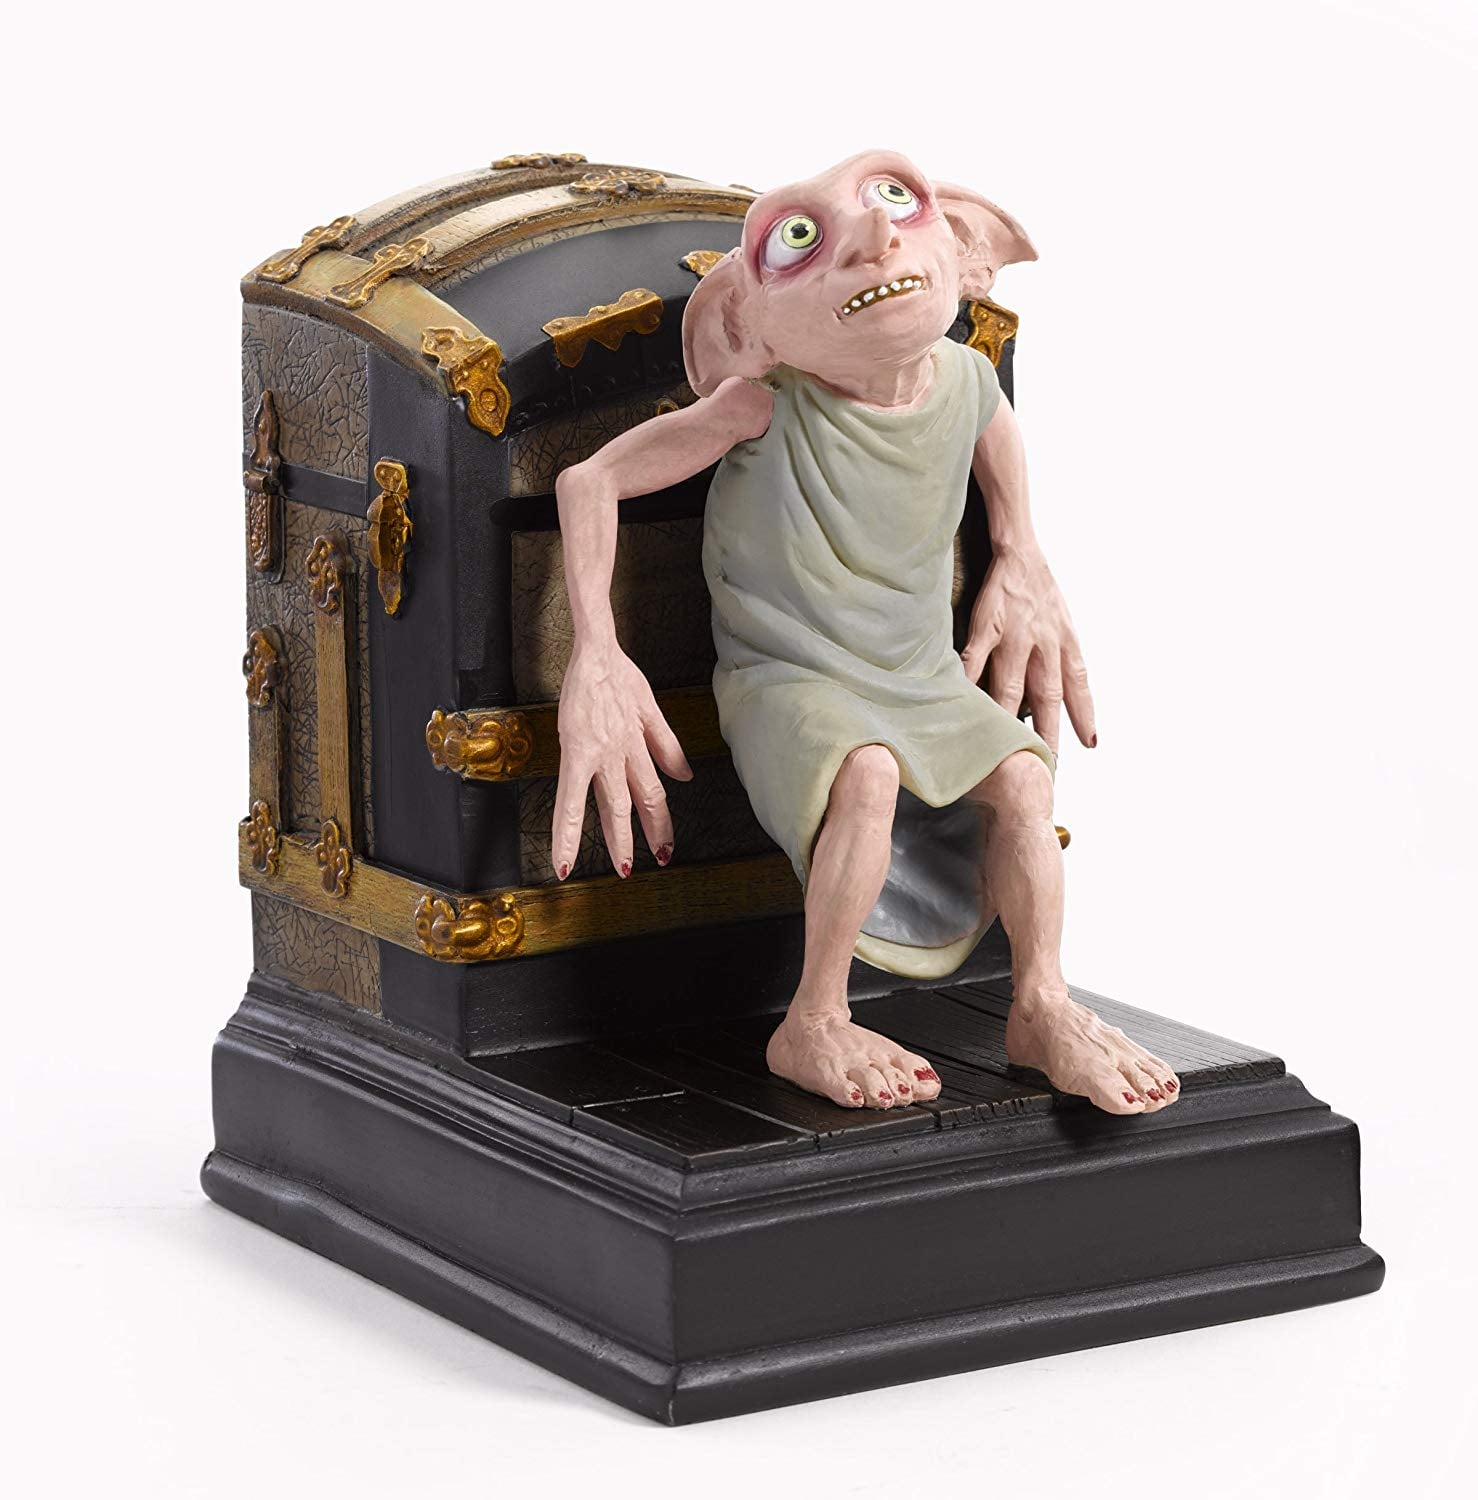 Dobby from Harry Potter Series